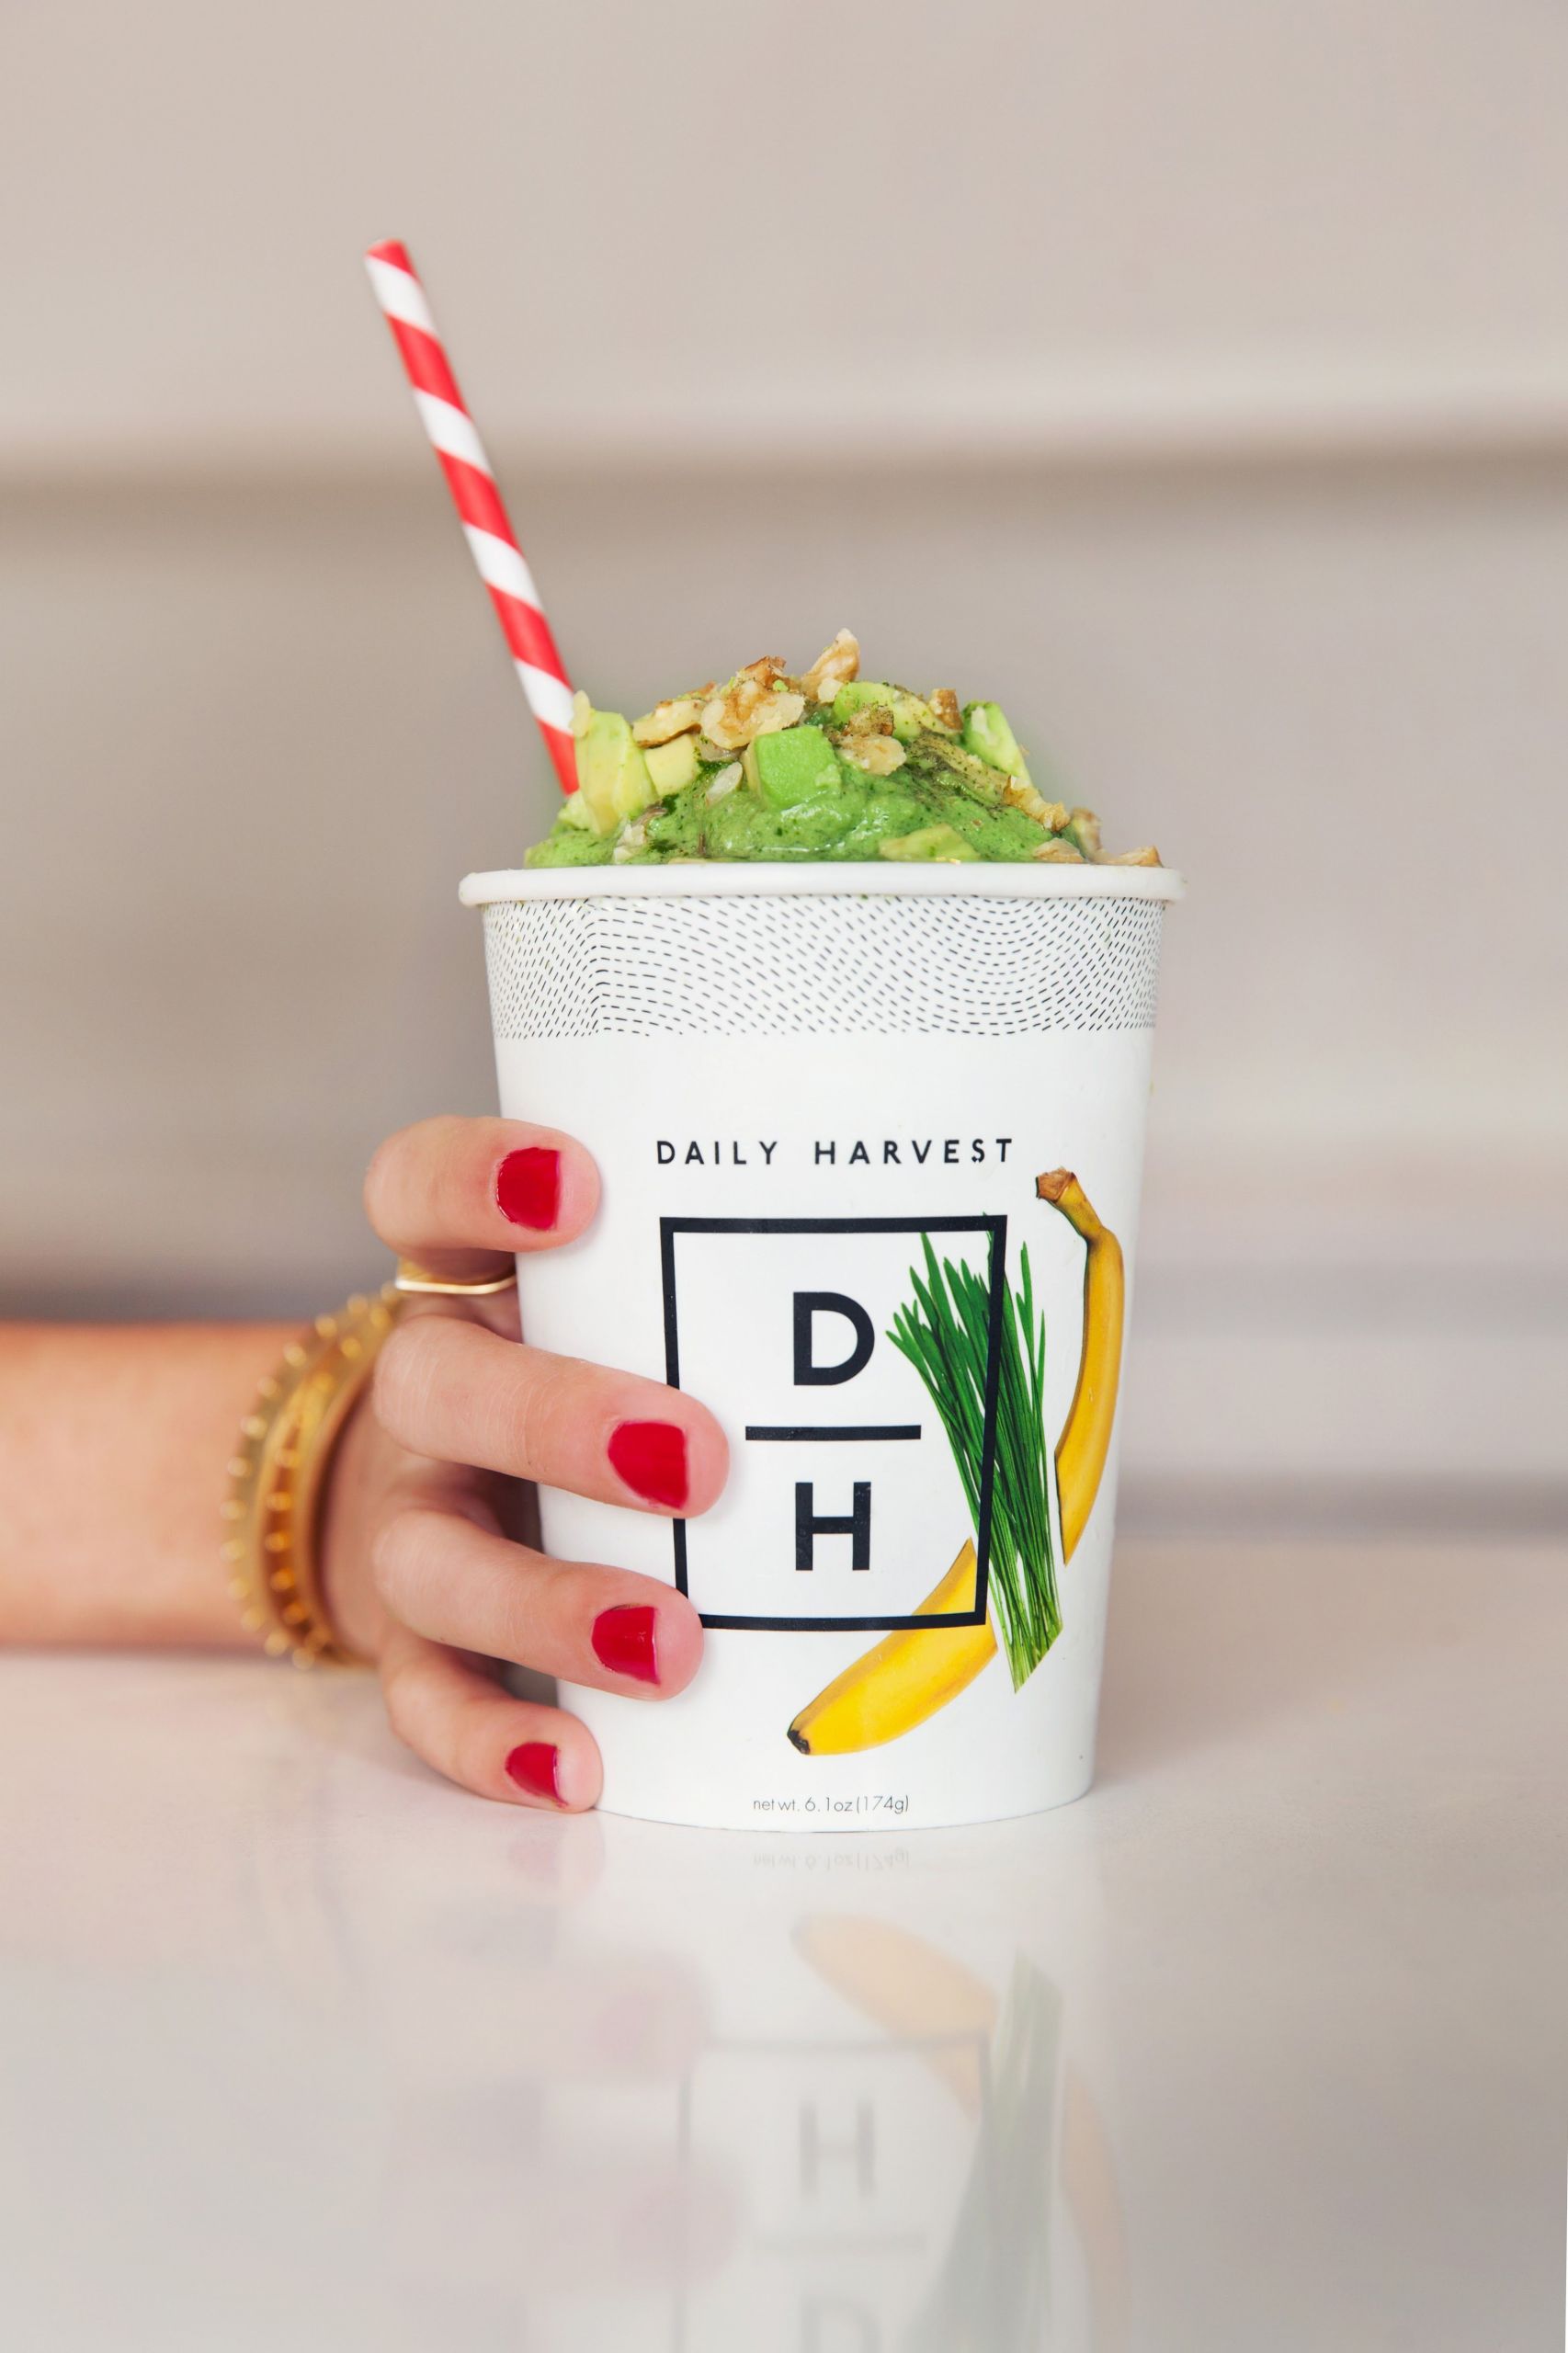 Smoothies Delivered To Your Door
 The 60 second smoothie has arrived and it s being